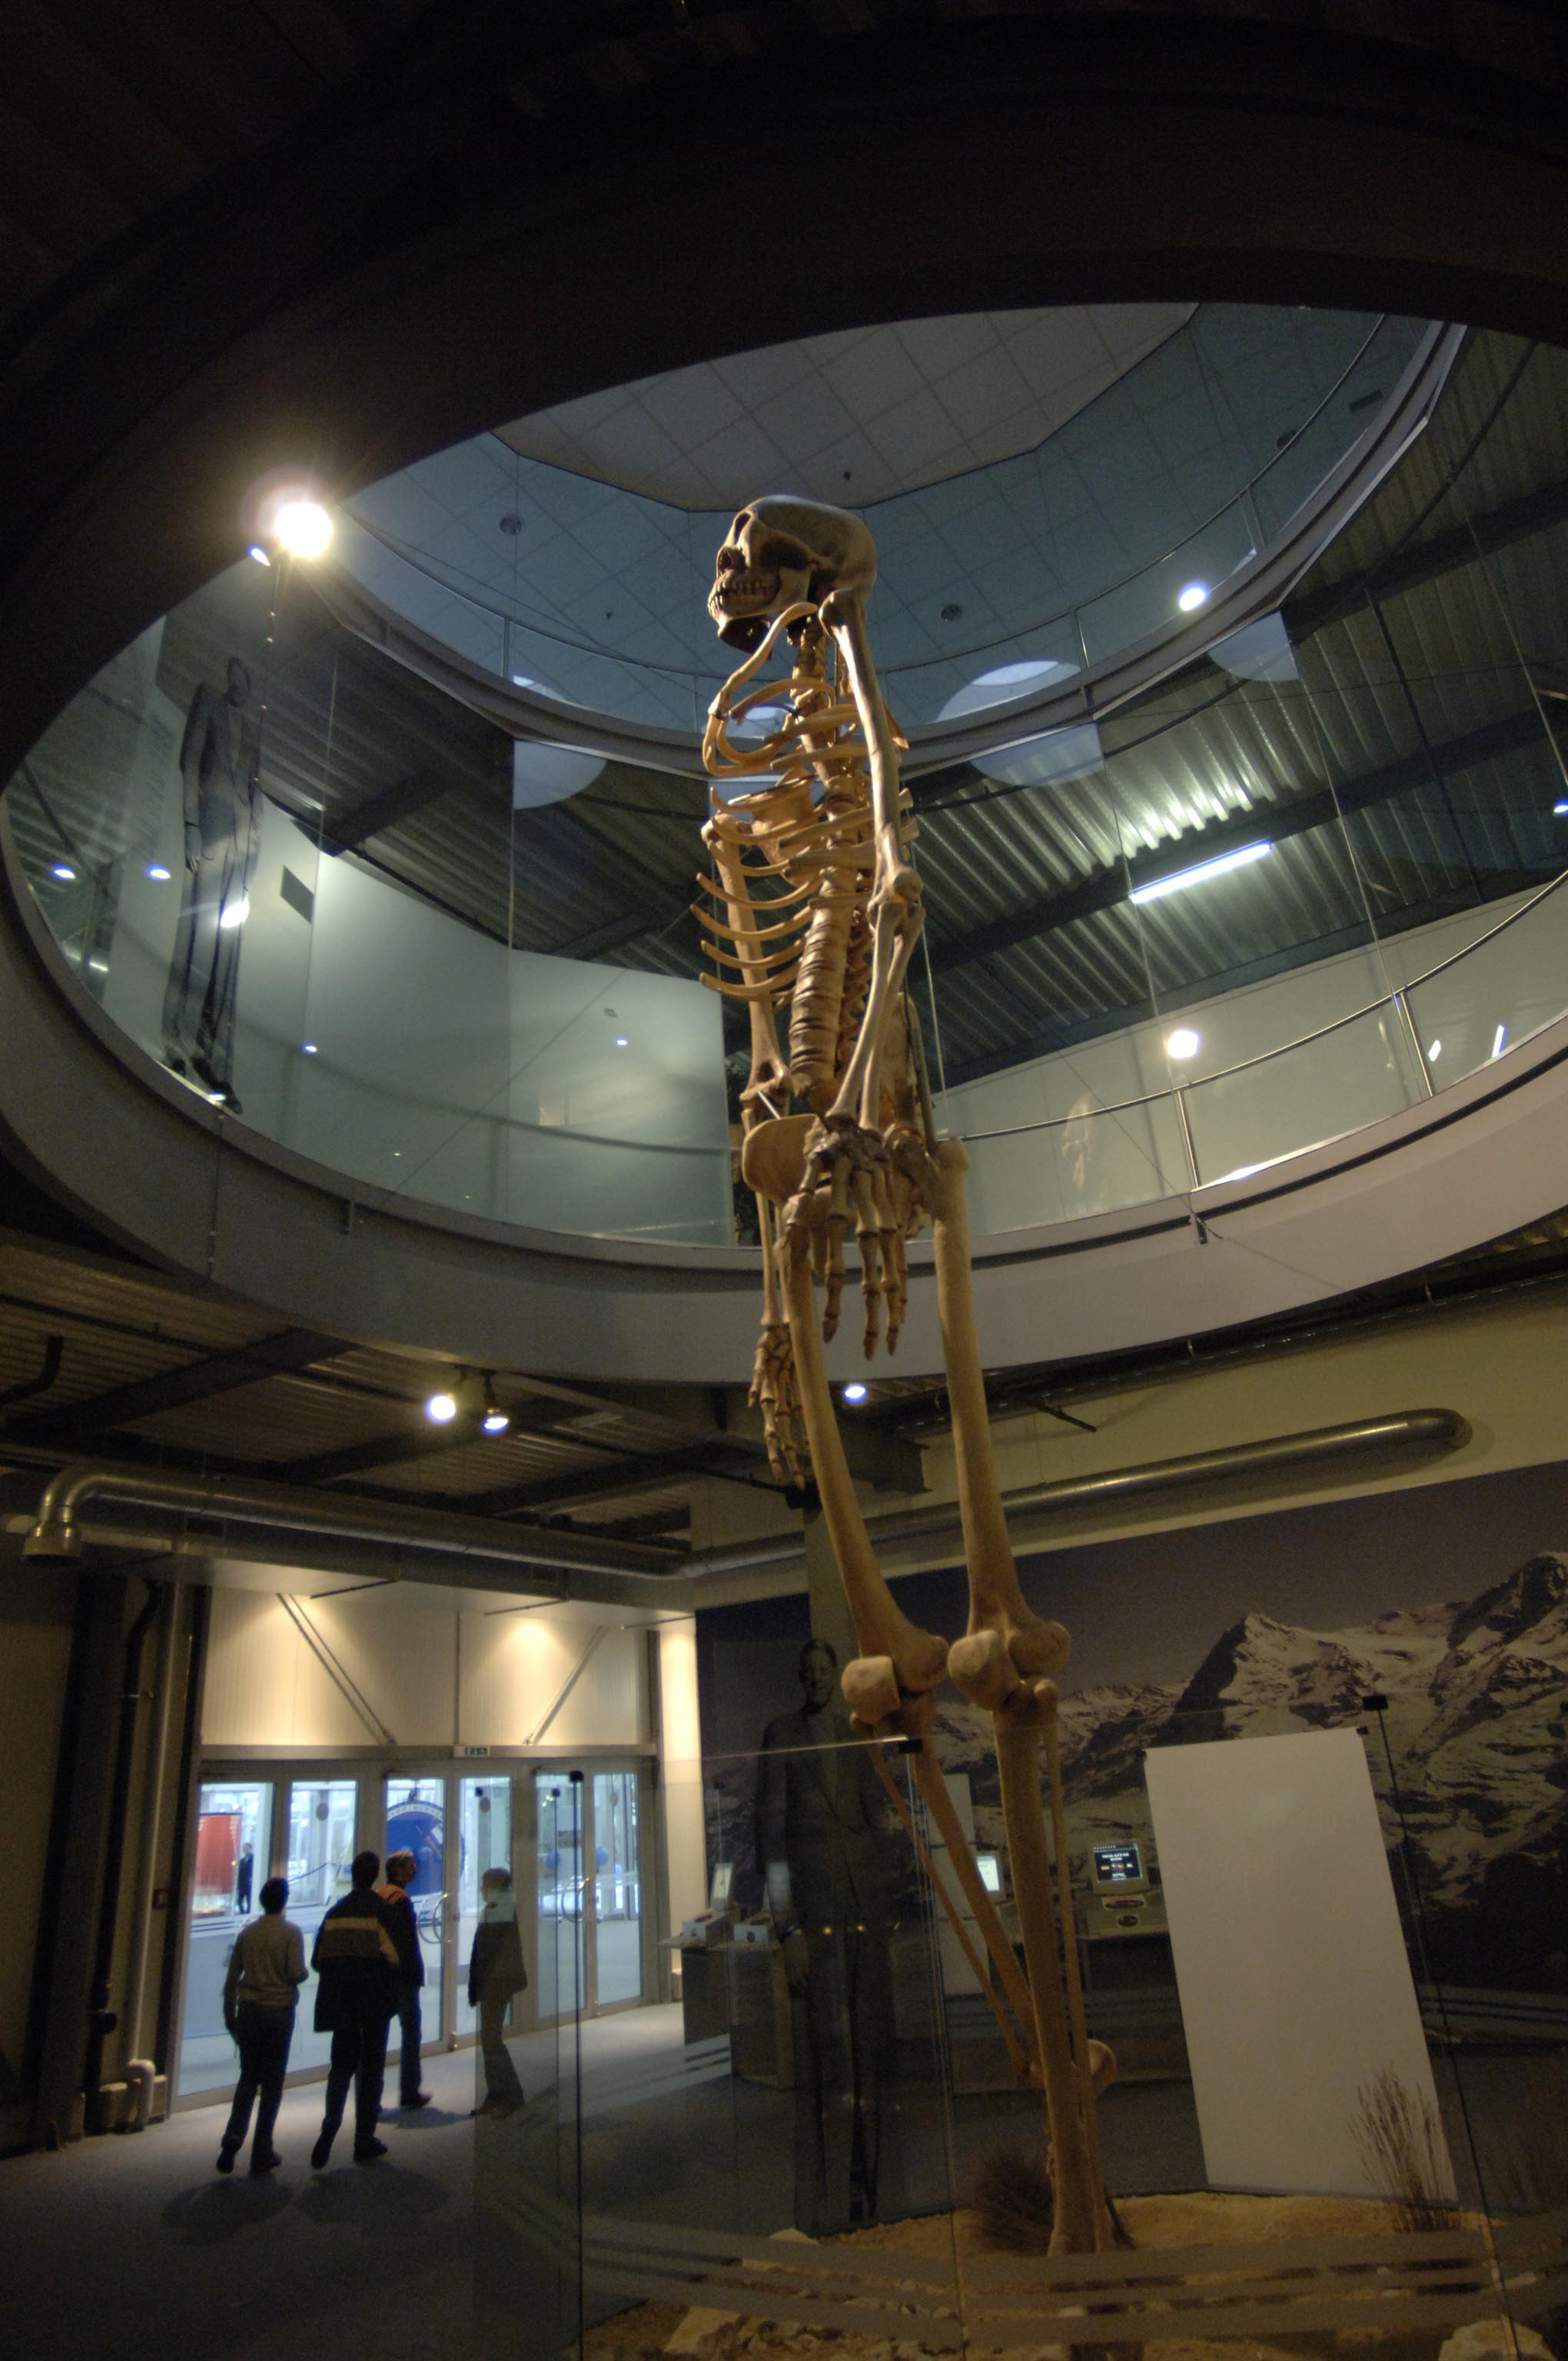 A giant model of a human skeleton in a museum space